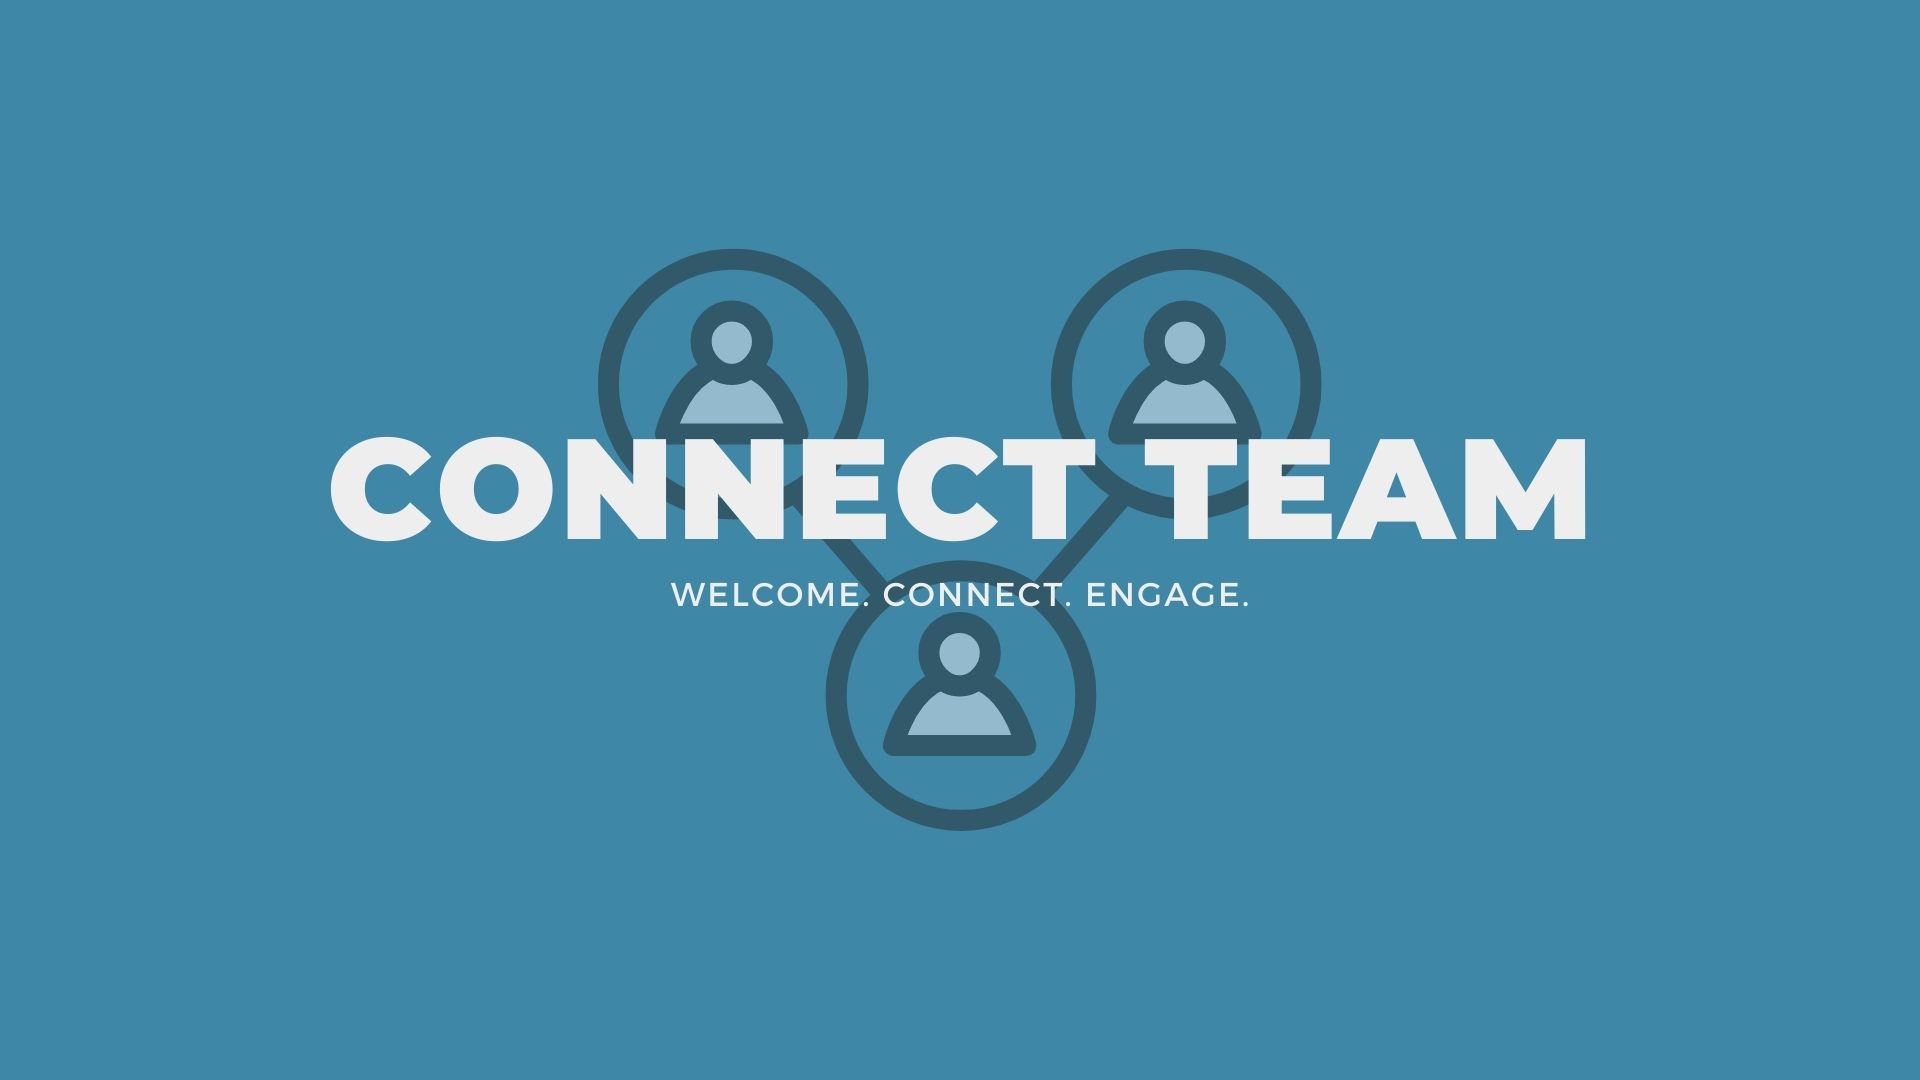 connect team image